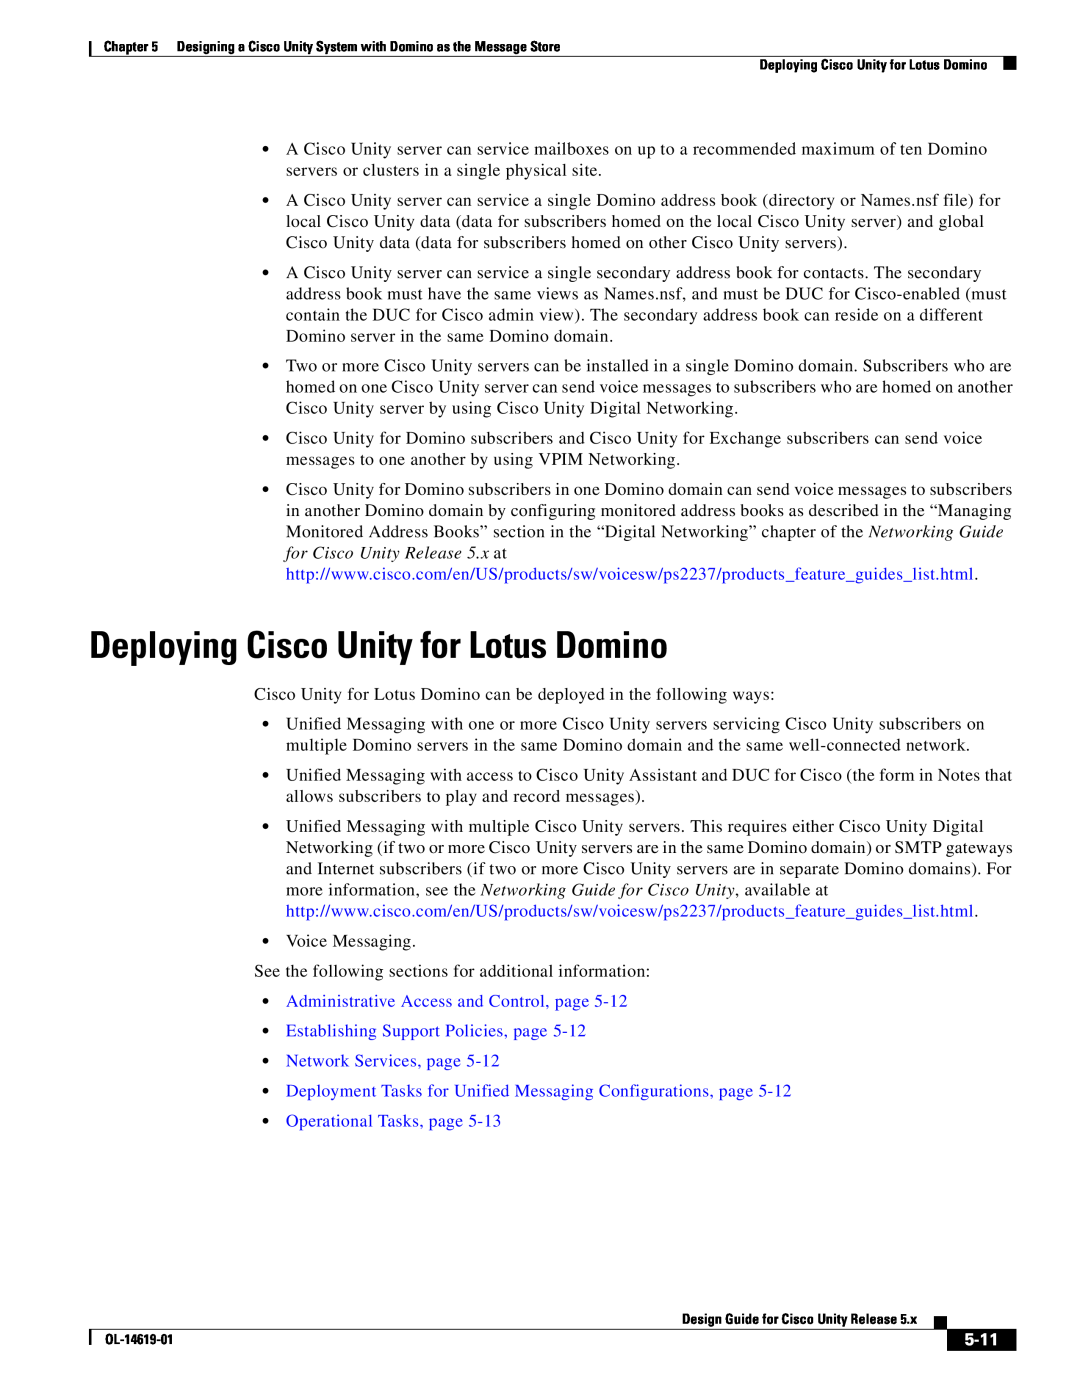 Cisco Systems OL-14619-01 manual Deploying Cisco Unity for Lotus Domino, Administrative Access and Control, page, 5-11 